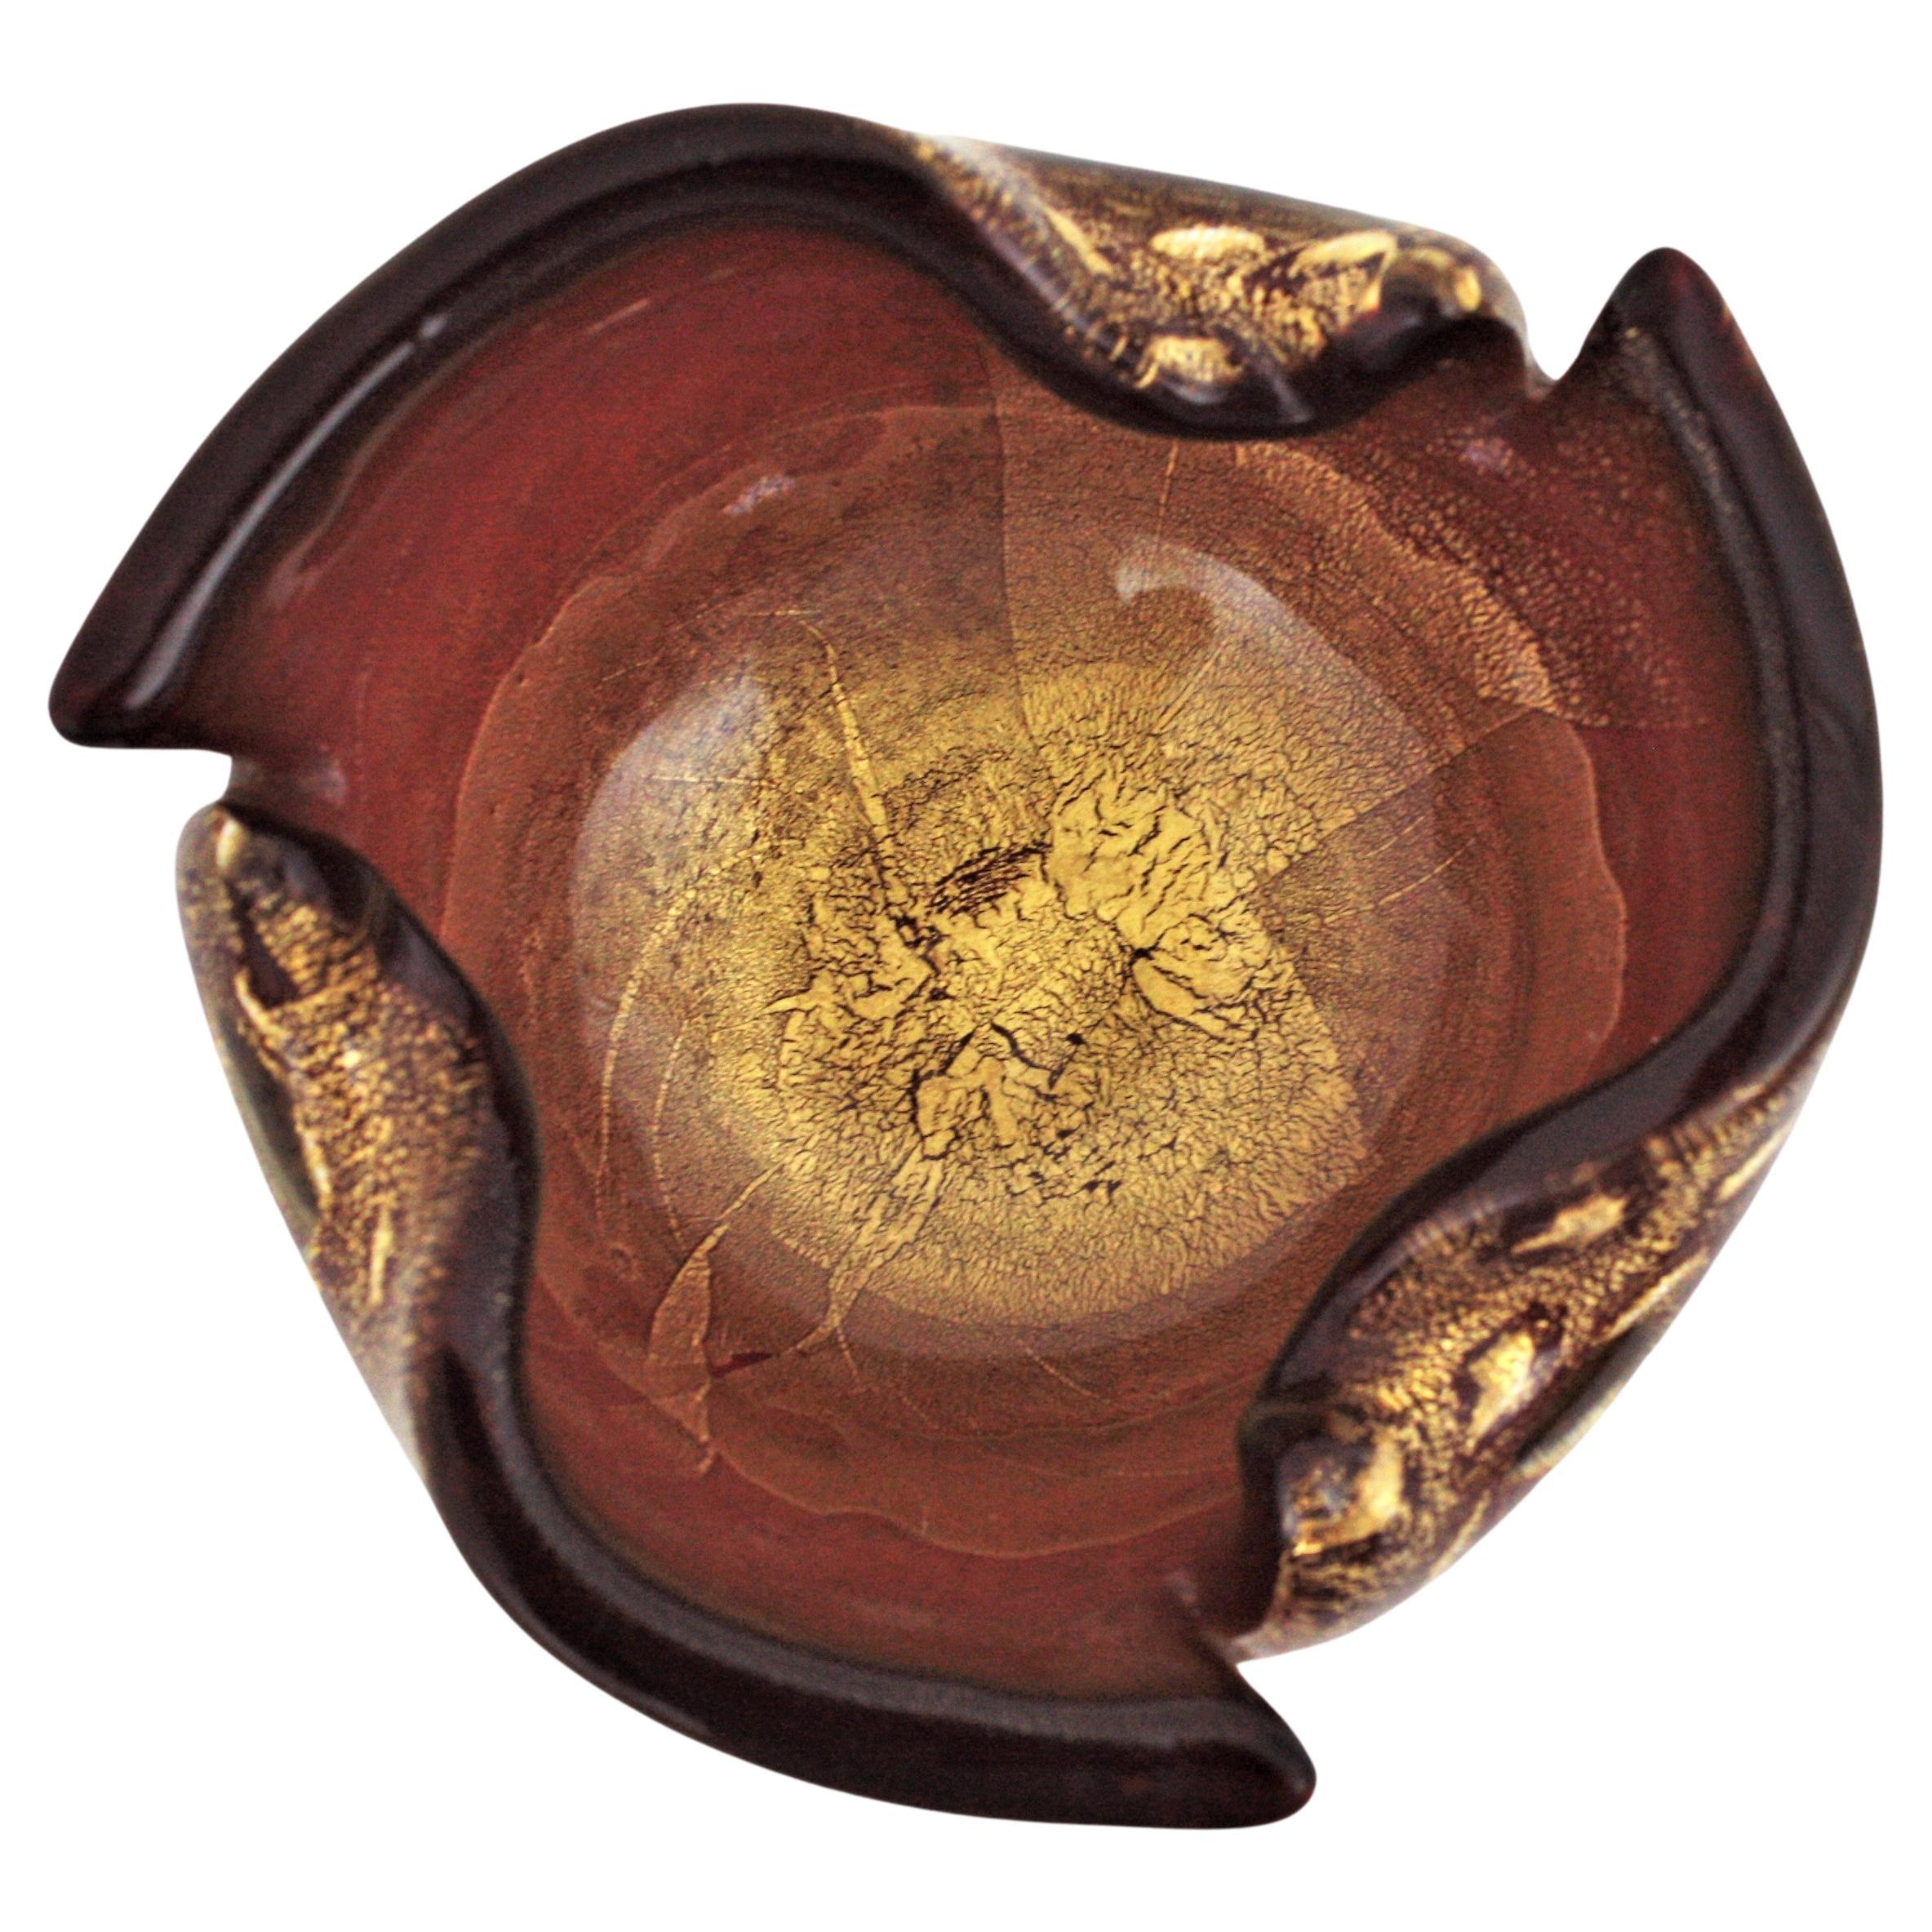 Eye-catching hand blown Murano cranberry red, gold flecks and controlled bubbles art glass bowl or ashtray. Attributed to Archimede Seguso, Italy, 1950s.
This stunning glass bowl has a freeform folded rim with air bubbles thorough and it is